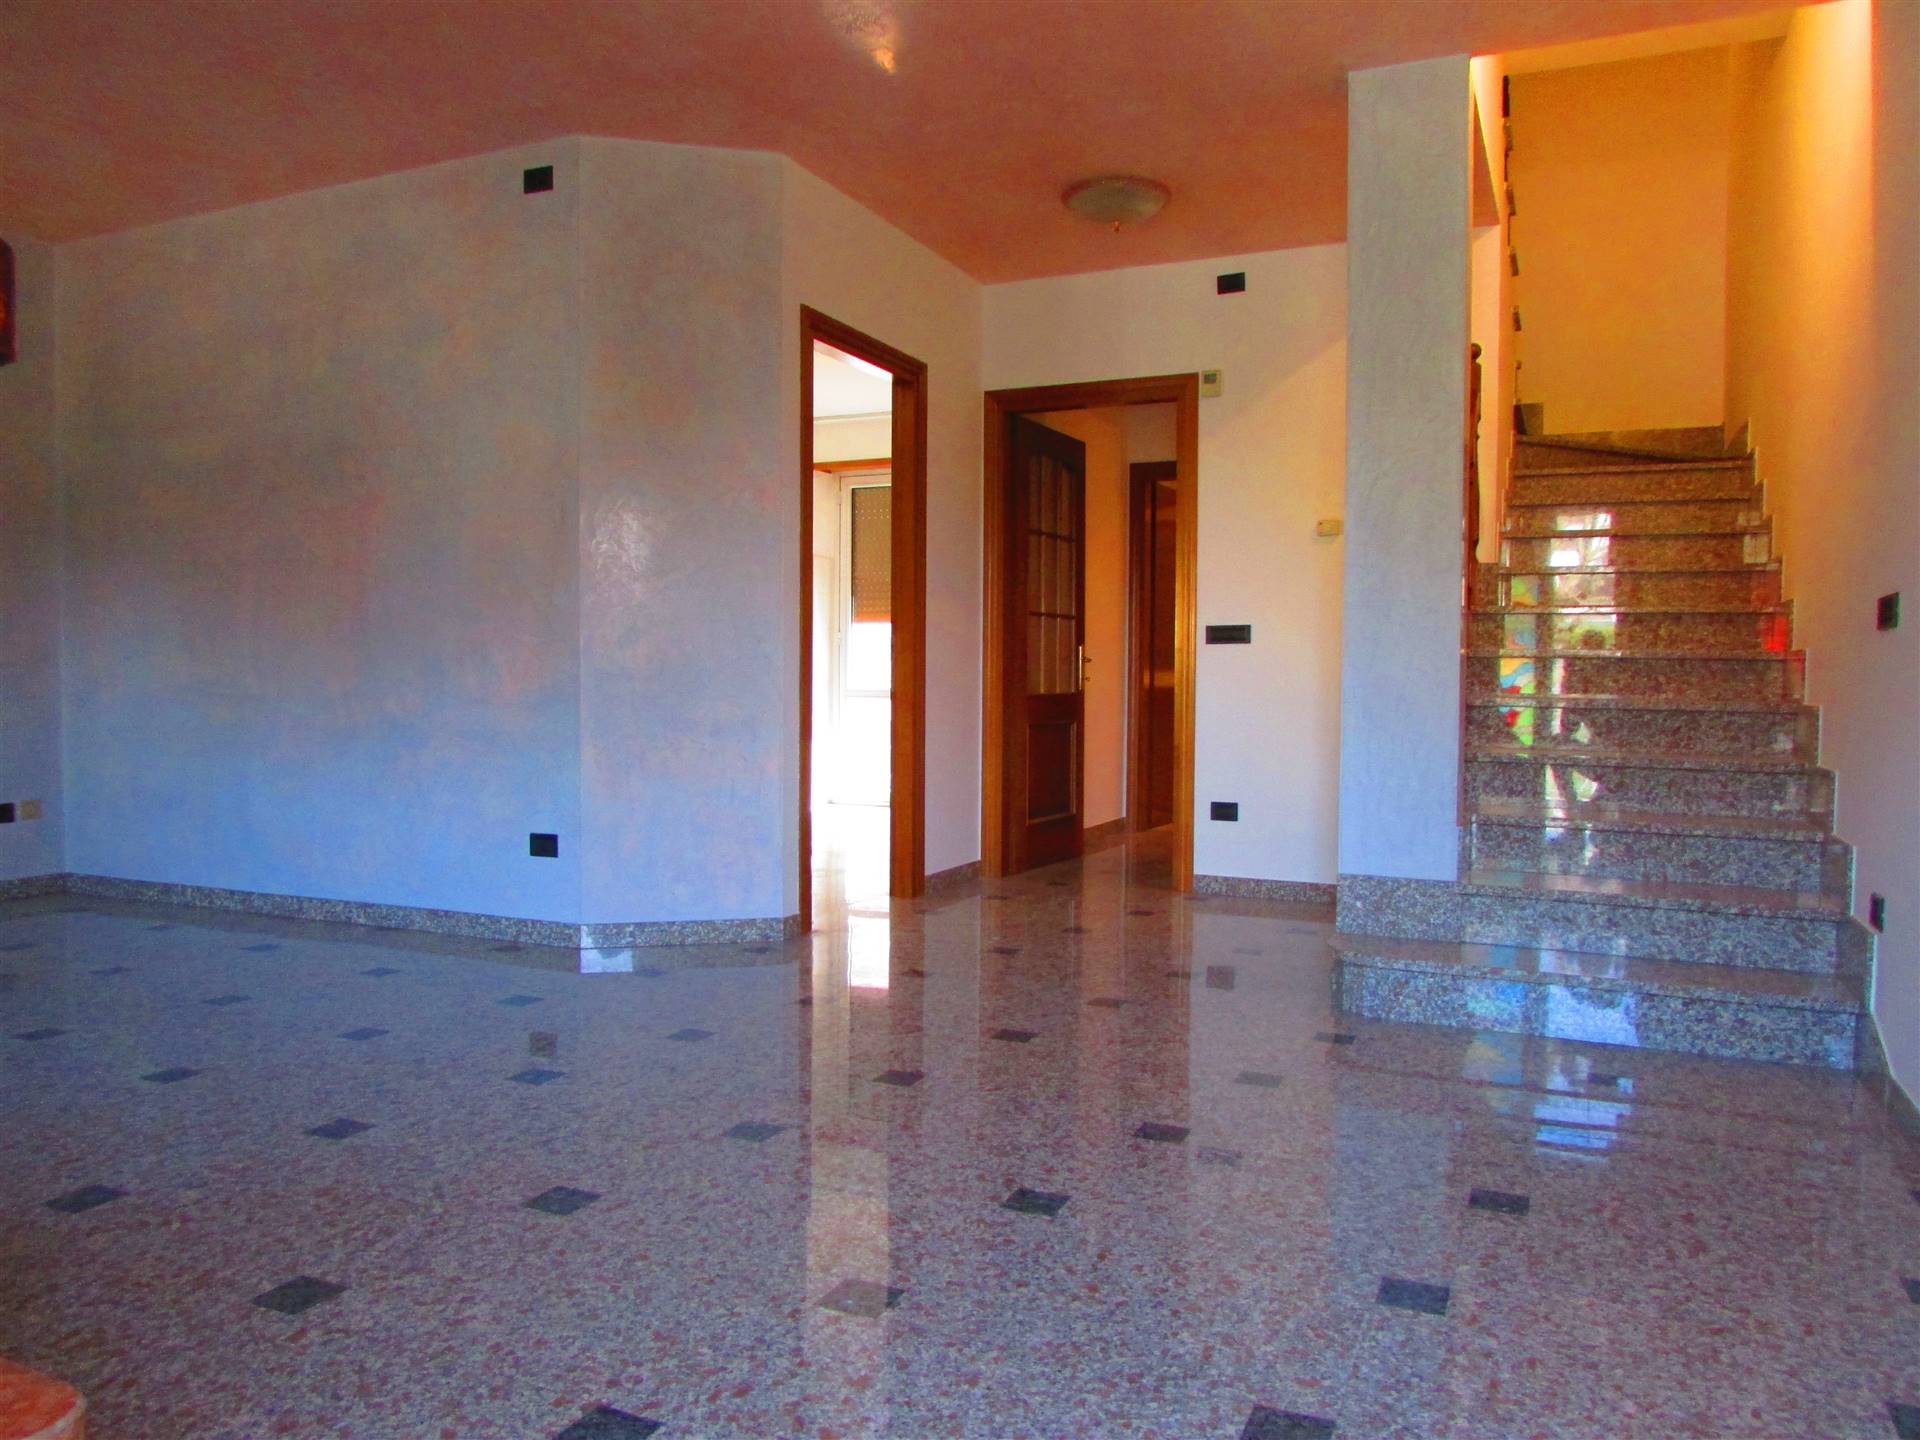 ALBAREDO D'ADIGE, Terraced house for sale of 120 Sq. mt., Excellent Condition, Heating Individual heating system, Energetic class: D, Epi: 133,47 